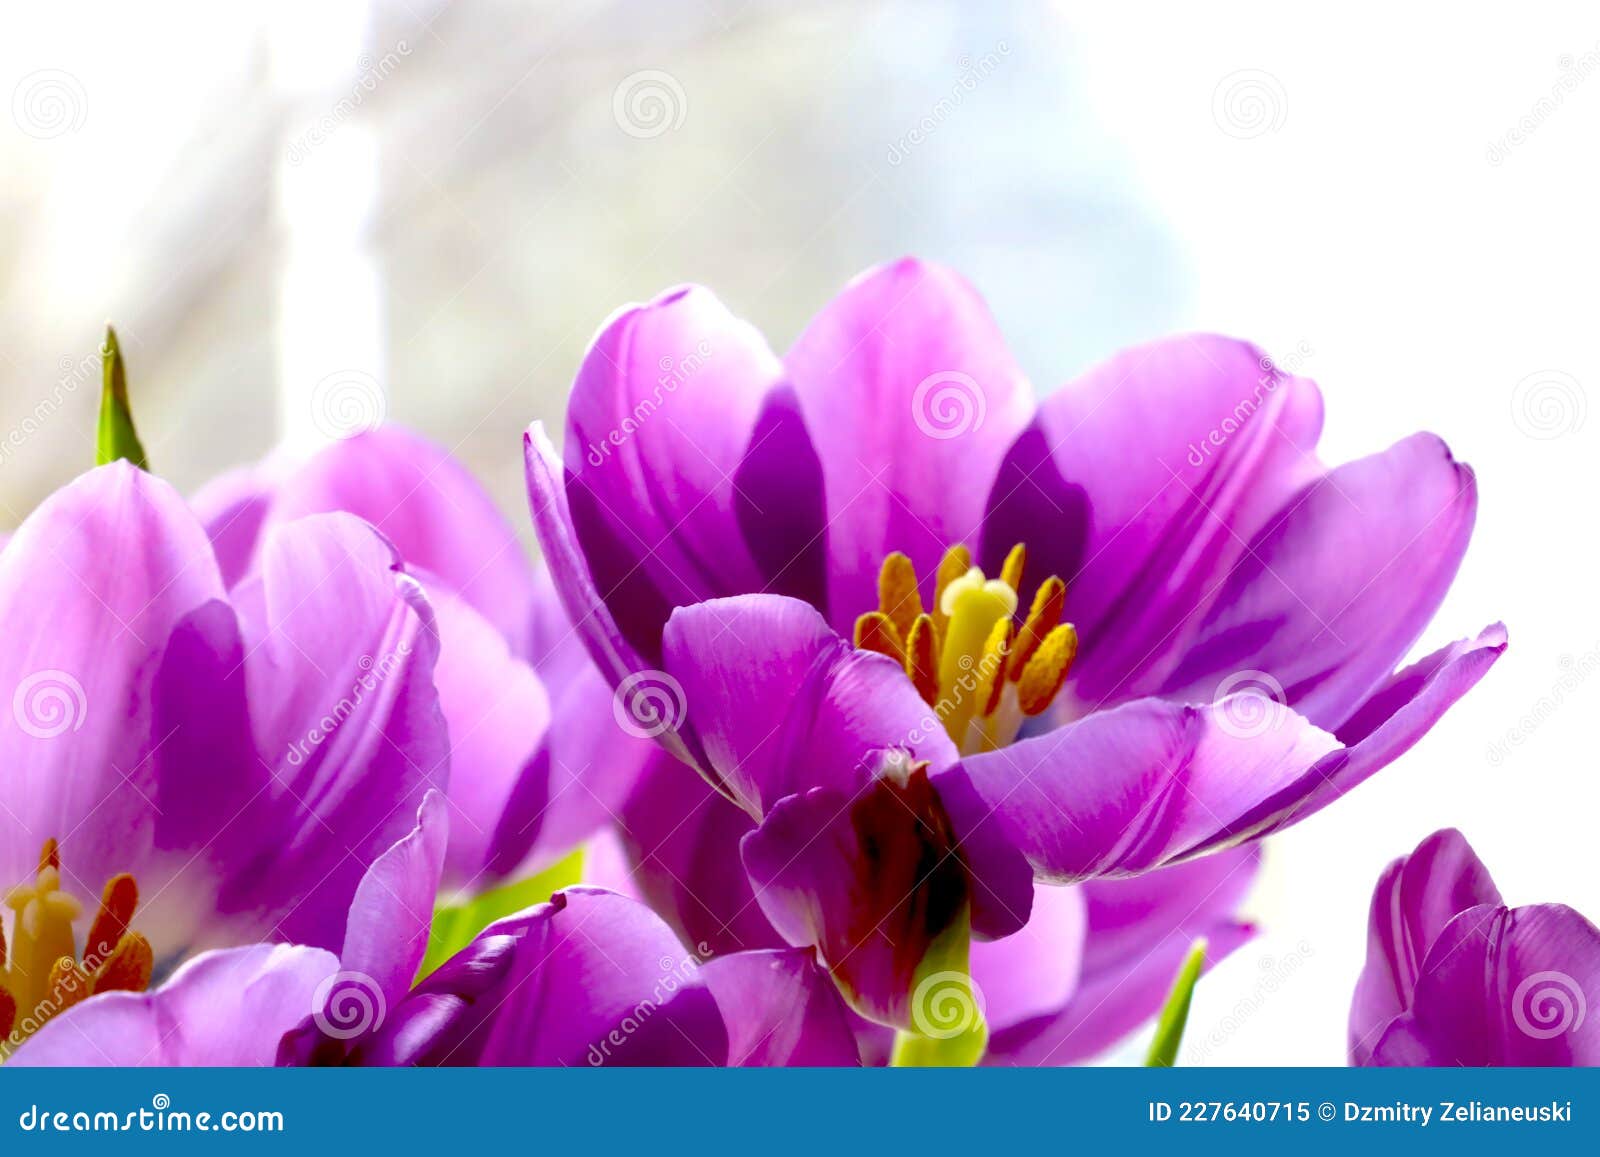 Close-up of a Purple Bouquet of Tulips in a Vase Stock Image - Image of ...